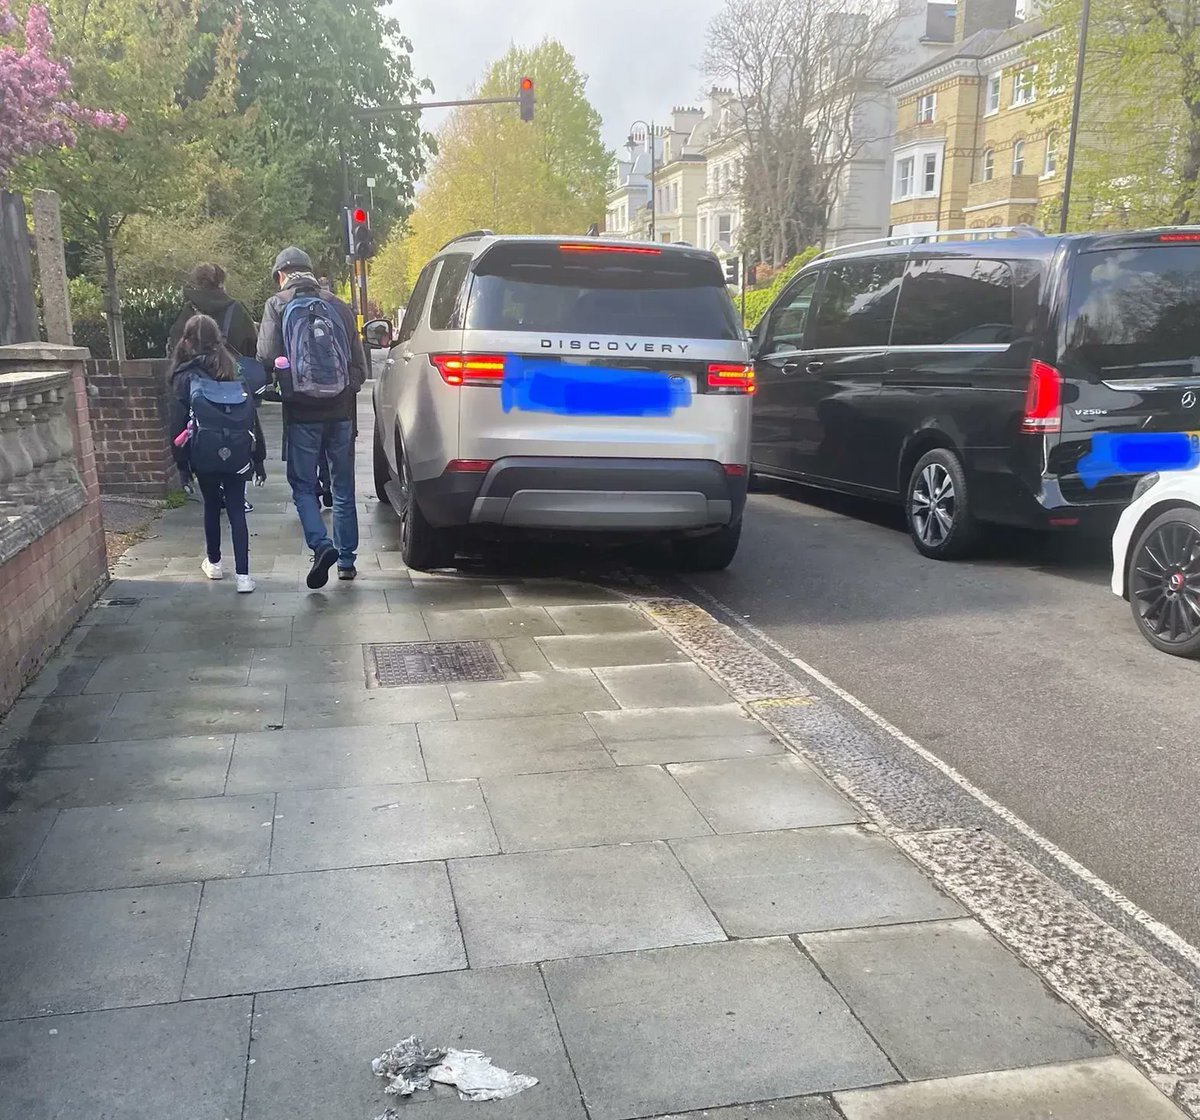 WE GET IT. The school run is hard. However, parking on the pavement makes the school run more dangerous for the kids who walk, either with their guardians or independently. And it is illegal, of course. Just don't do it. 👍 #BackToSchool #SaferStreets #StreetSpaceLDN